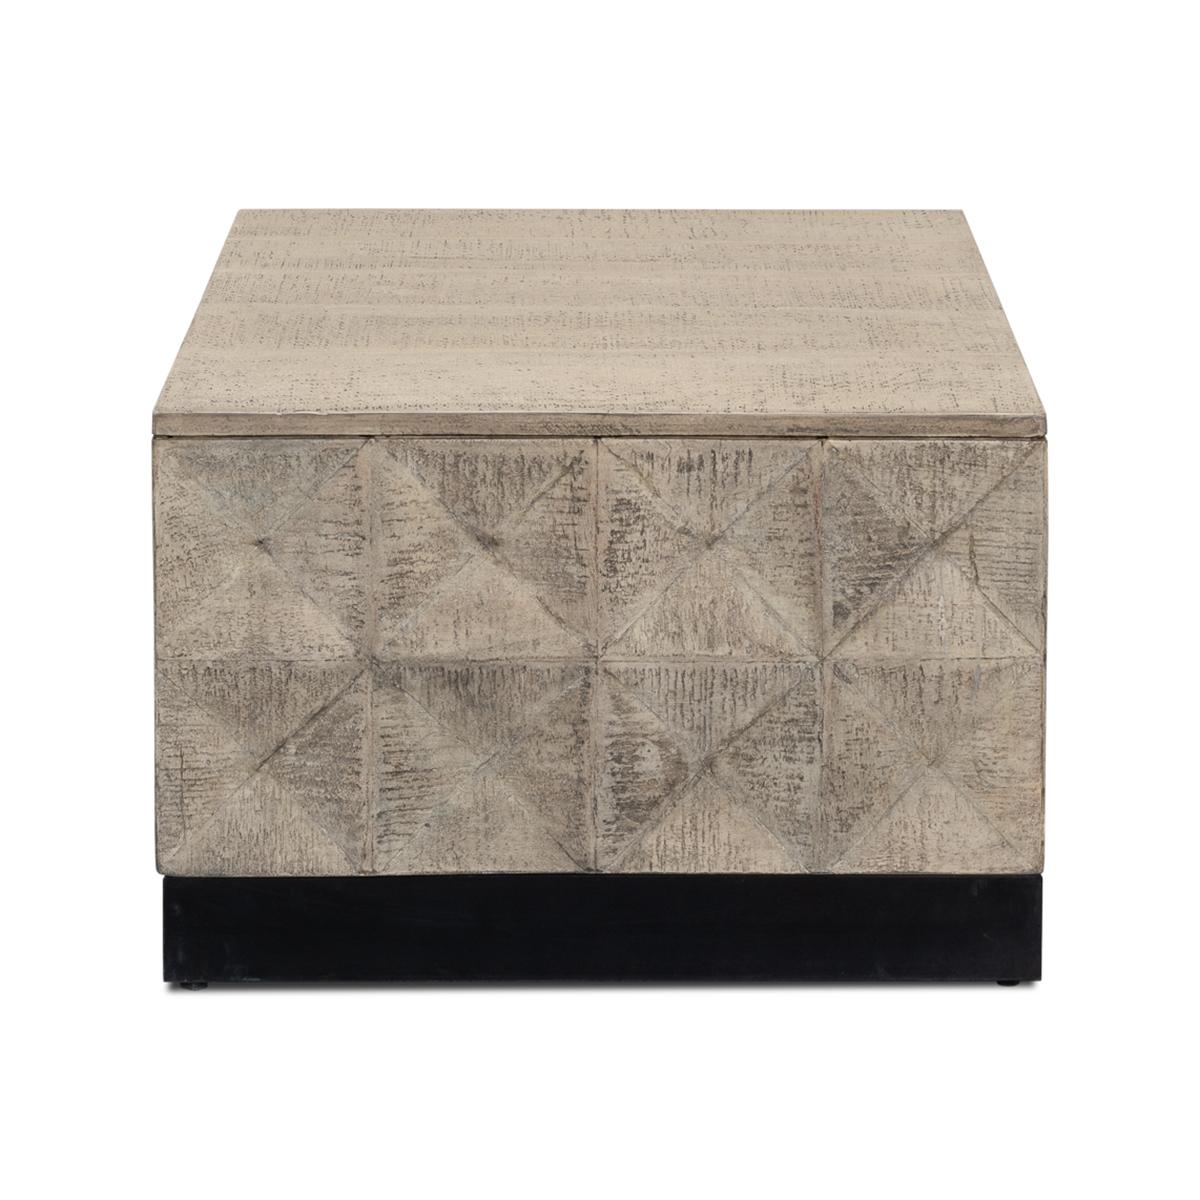 Modern rustic square coffee table in a grey eclectic finish on mango wood, with geometric patterns to the sides and raised on an iron plinth base.

Dimensions: 24